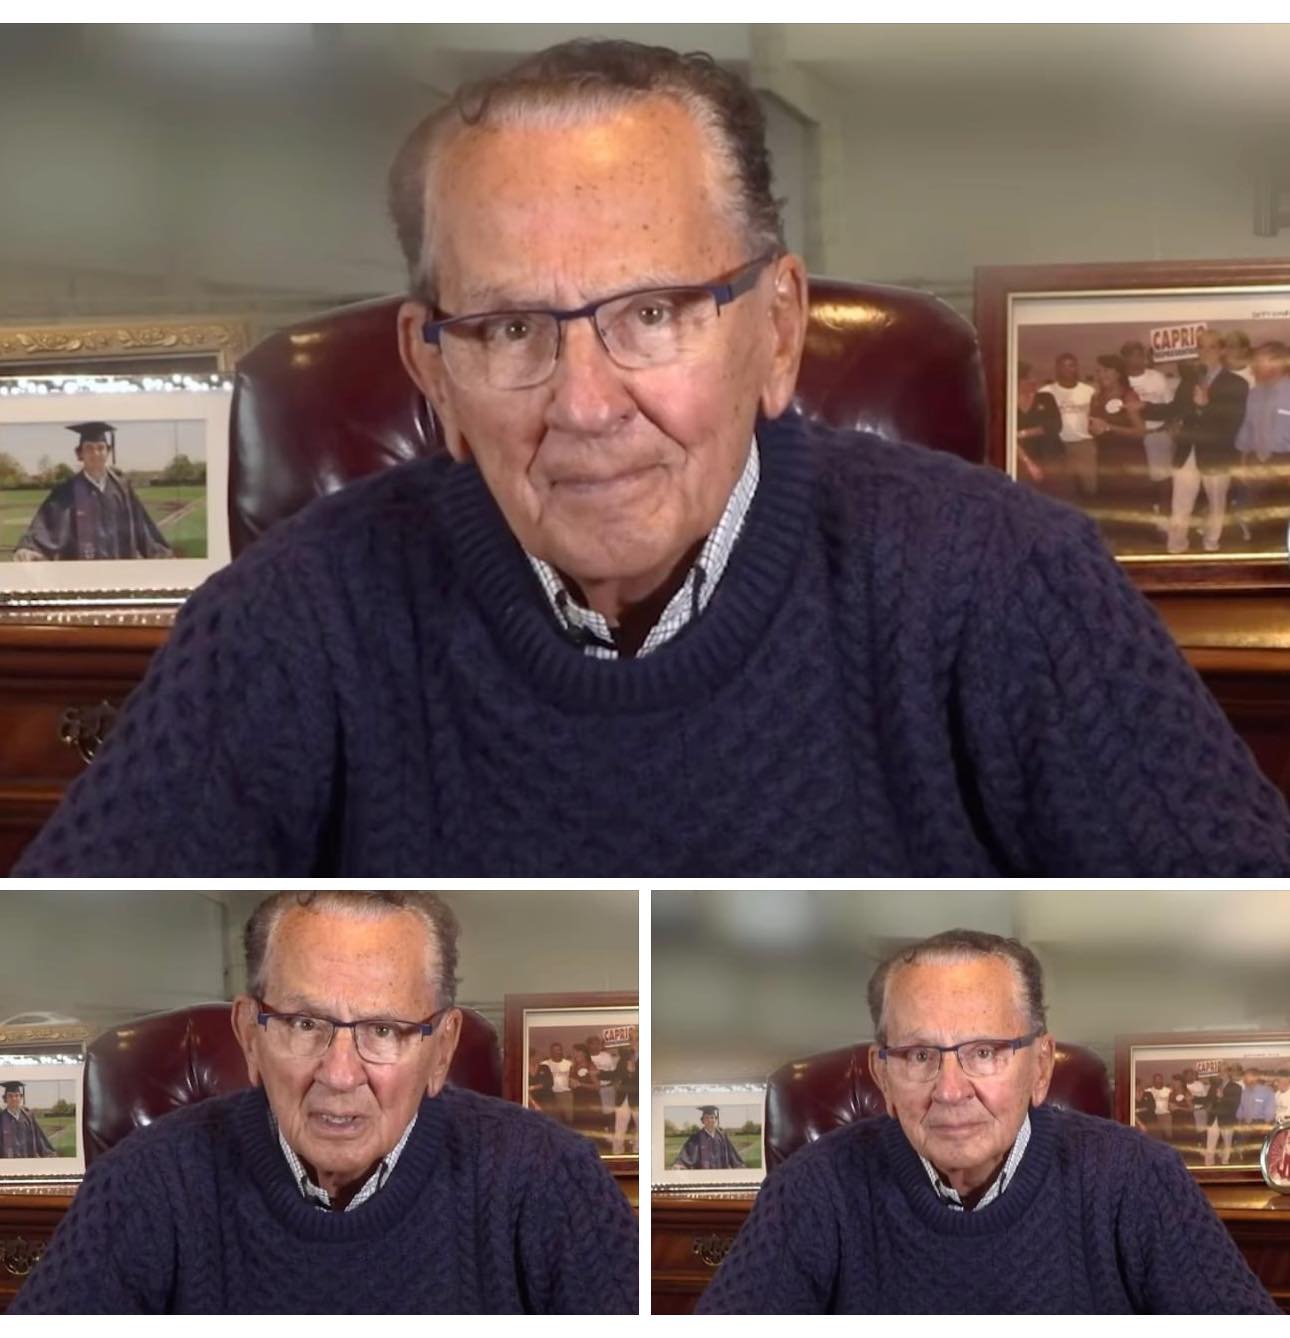 EMOTIONAL REVELATION: TV ICON FRANK CAPRIO SHARES HEARTBREAKING CANCER DIAGNOSIS IN VIDEO